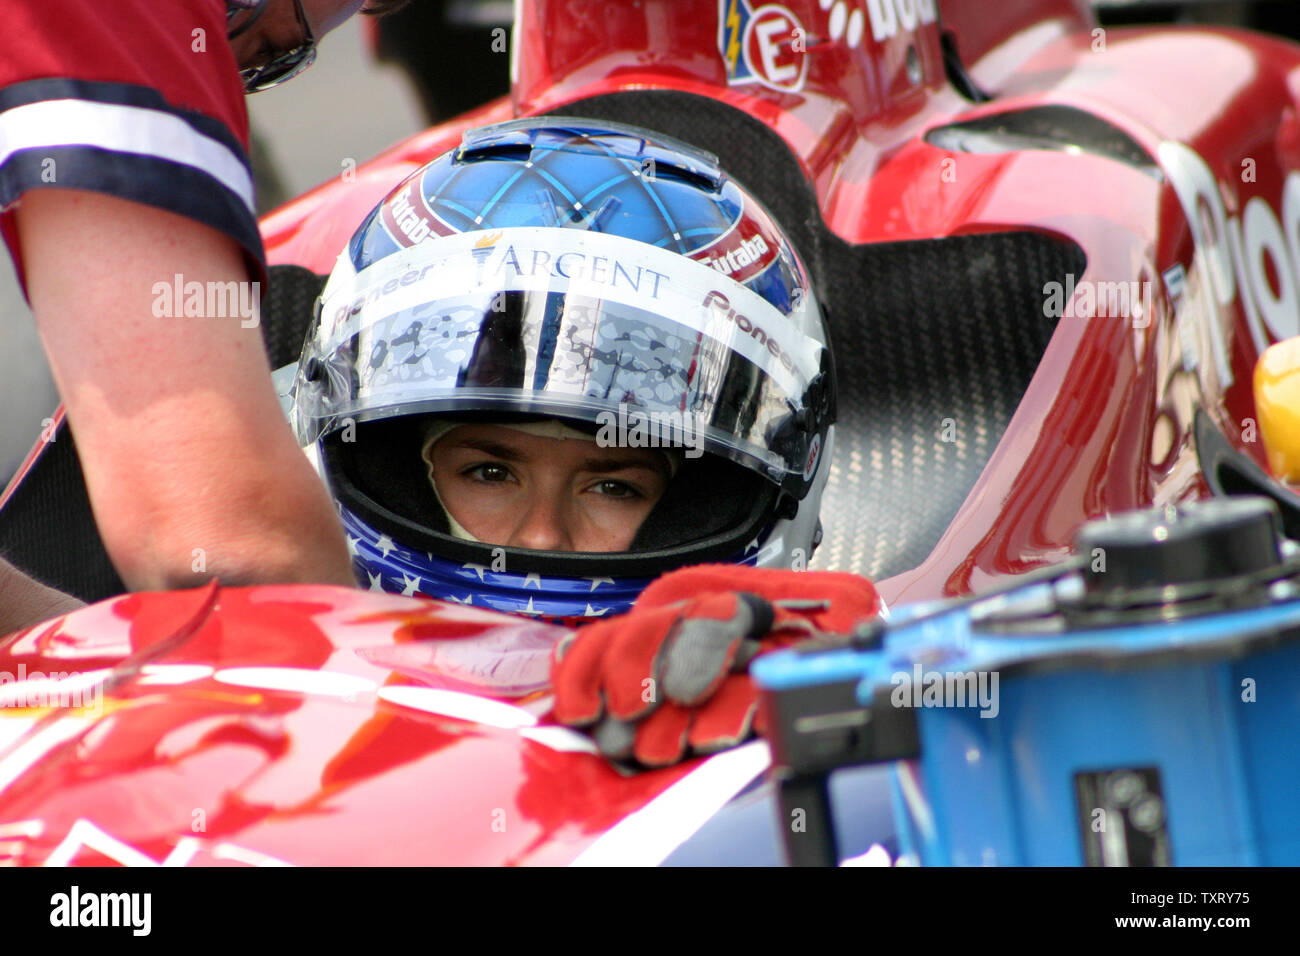 https://c8.alamy.com/comp/TXRY75/rookie-danica-patrick-gets-ready-to-set-the-fastest-time-in-day-2-of-practice-for-the-indianapolis-500-on-may-10-2005-her-speed-was-222741-mph-patrick-hopes-to-become-the-4th-woman-driver-to-qualify-for-the-indianapolis-500-she-will-drive-for-the-david-lettermanbobby-rahal-racing-team-upi-photodarlene-coons-TXRY75.jpg